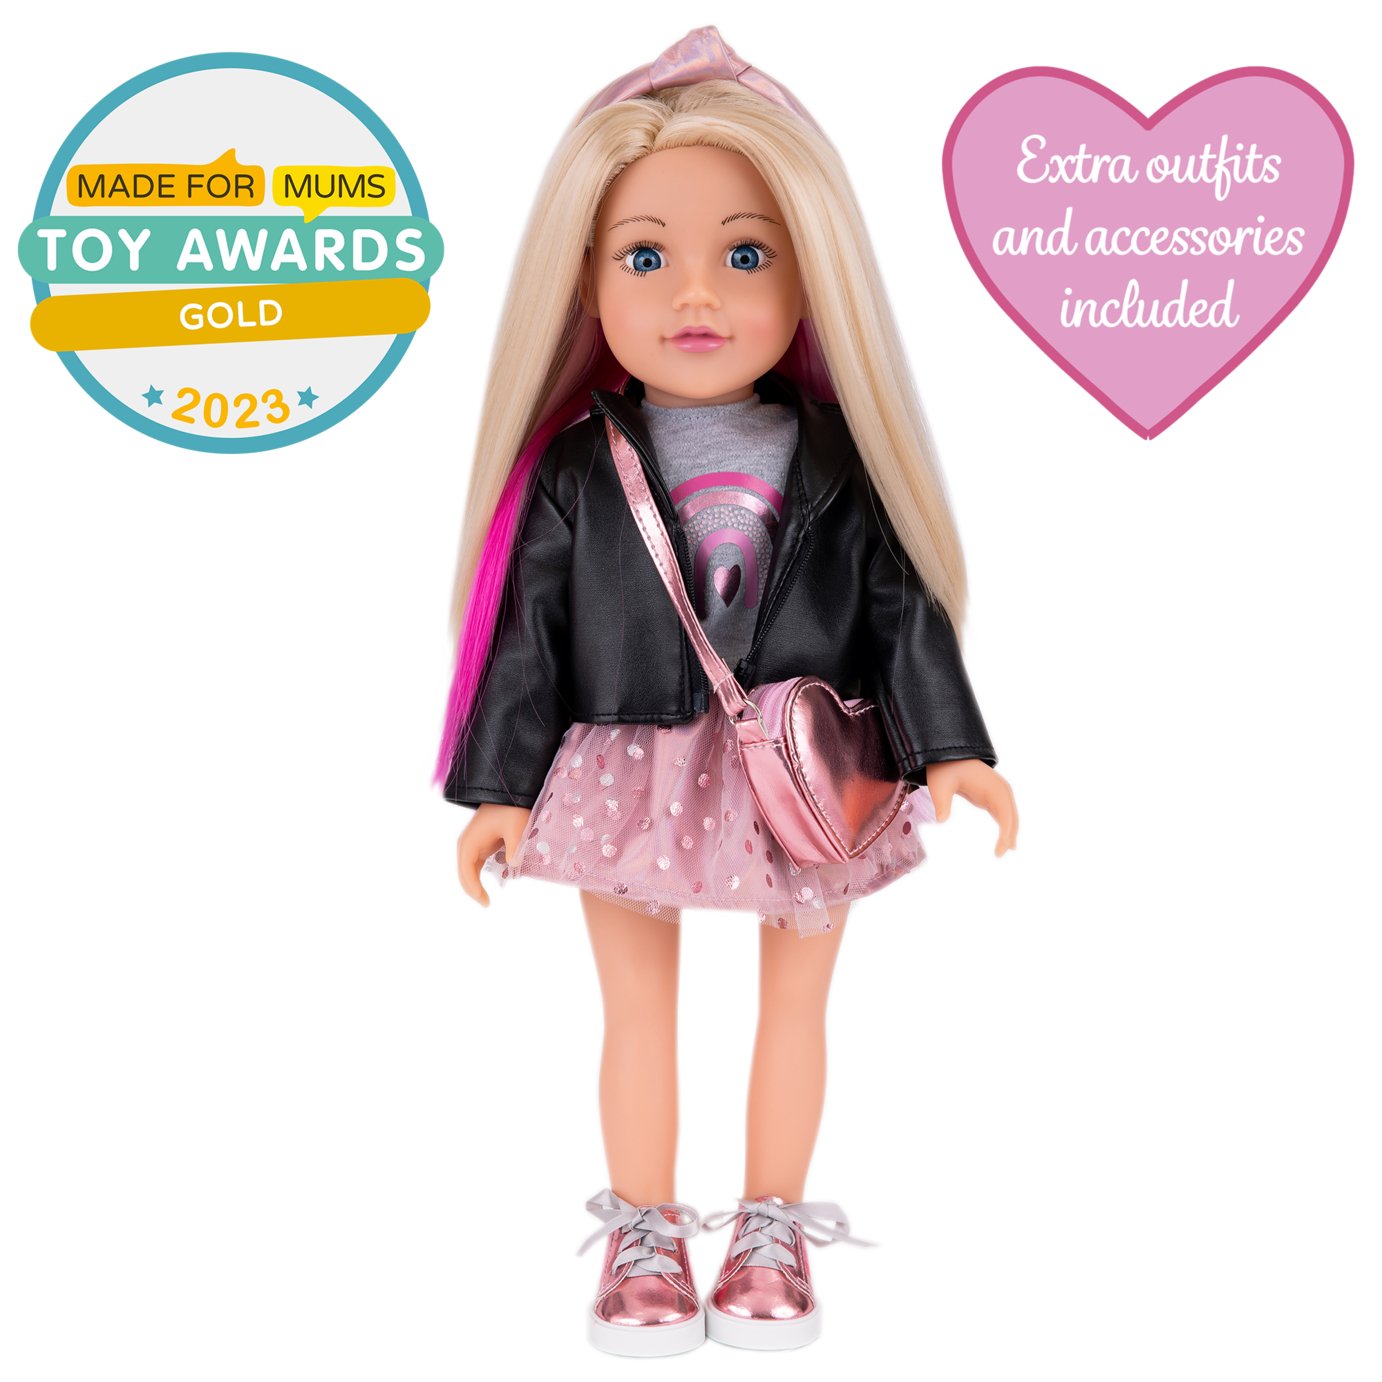 DesignaFriend Tilly Bumper Doll with Outfit